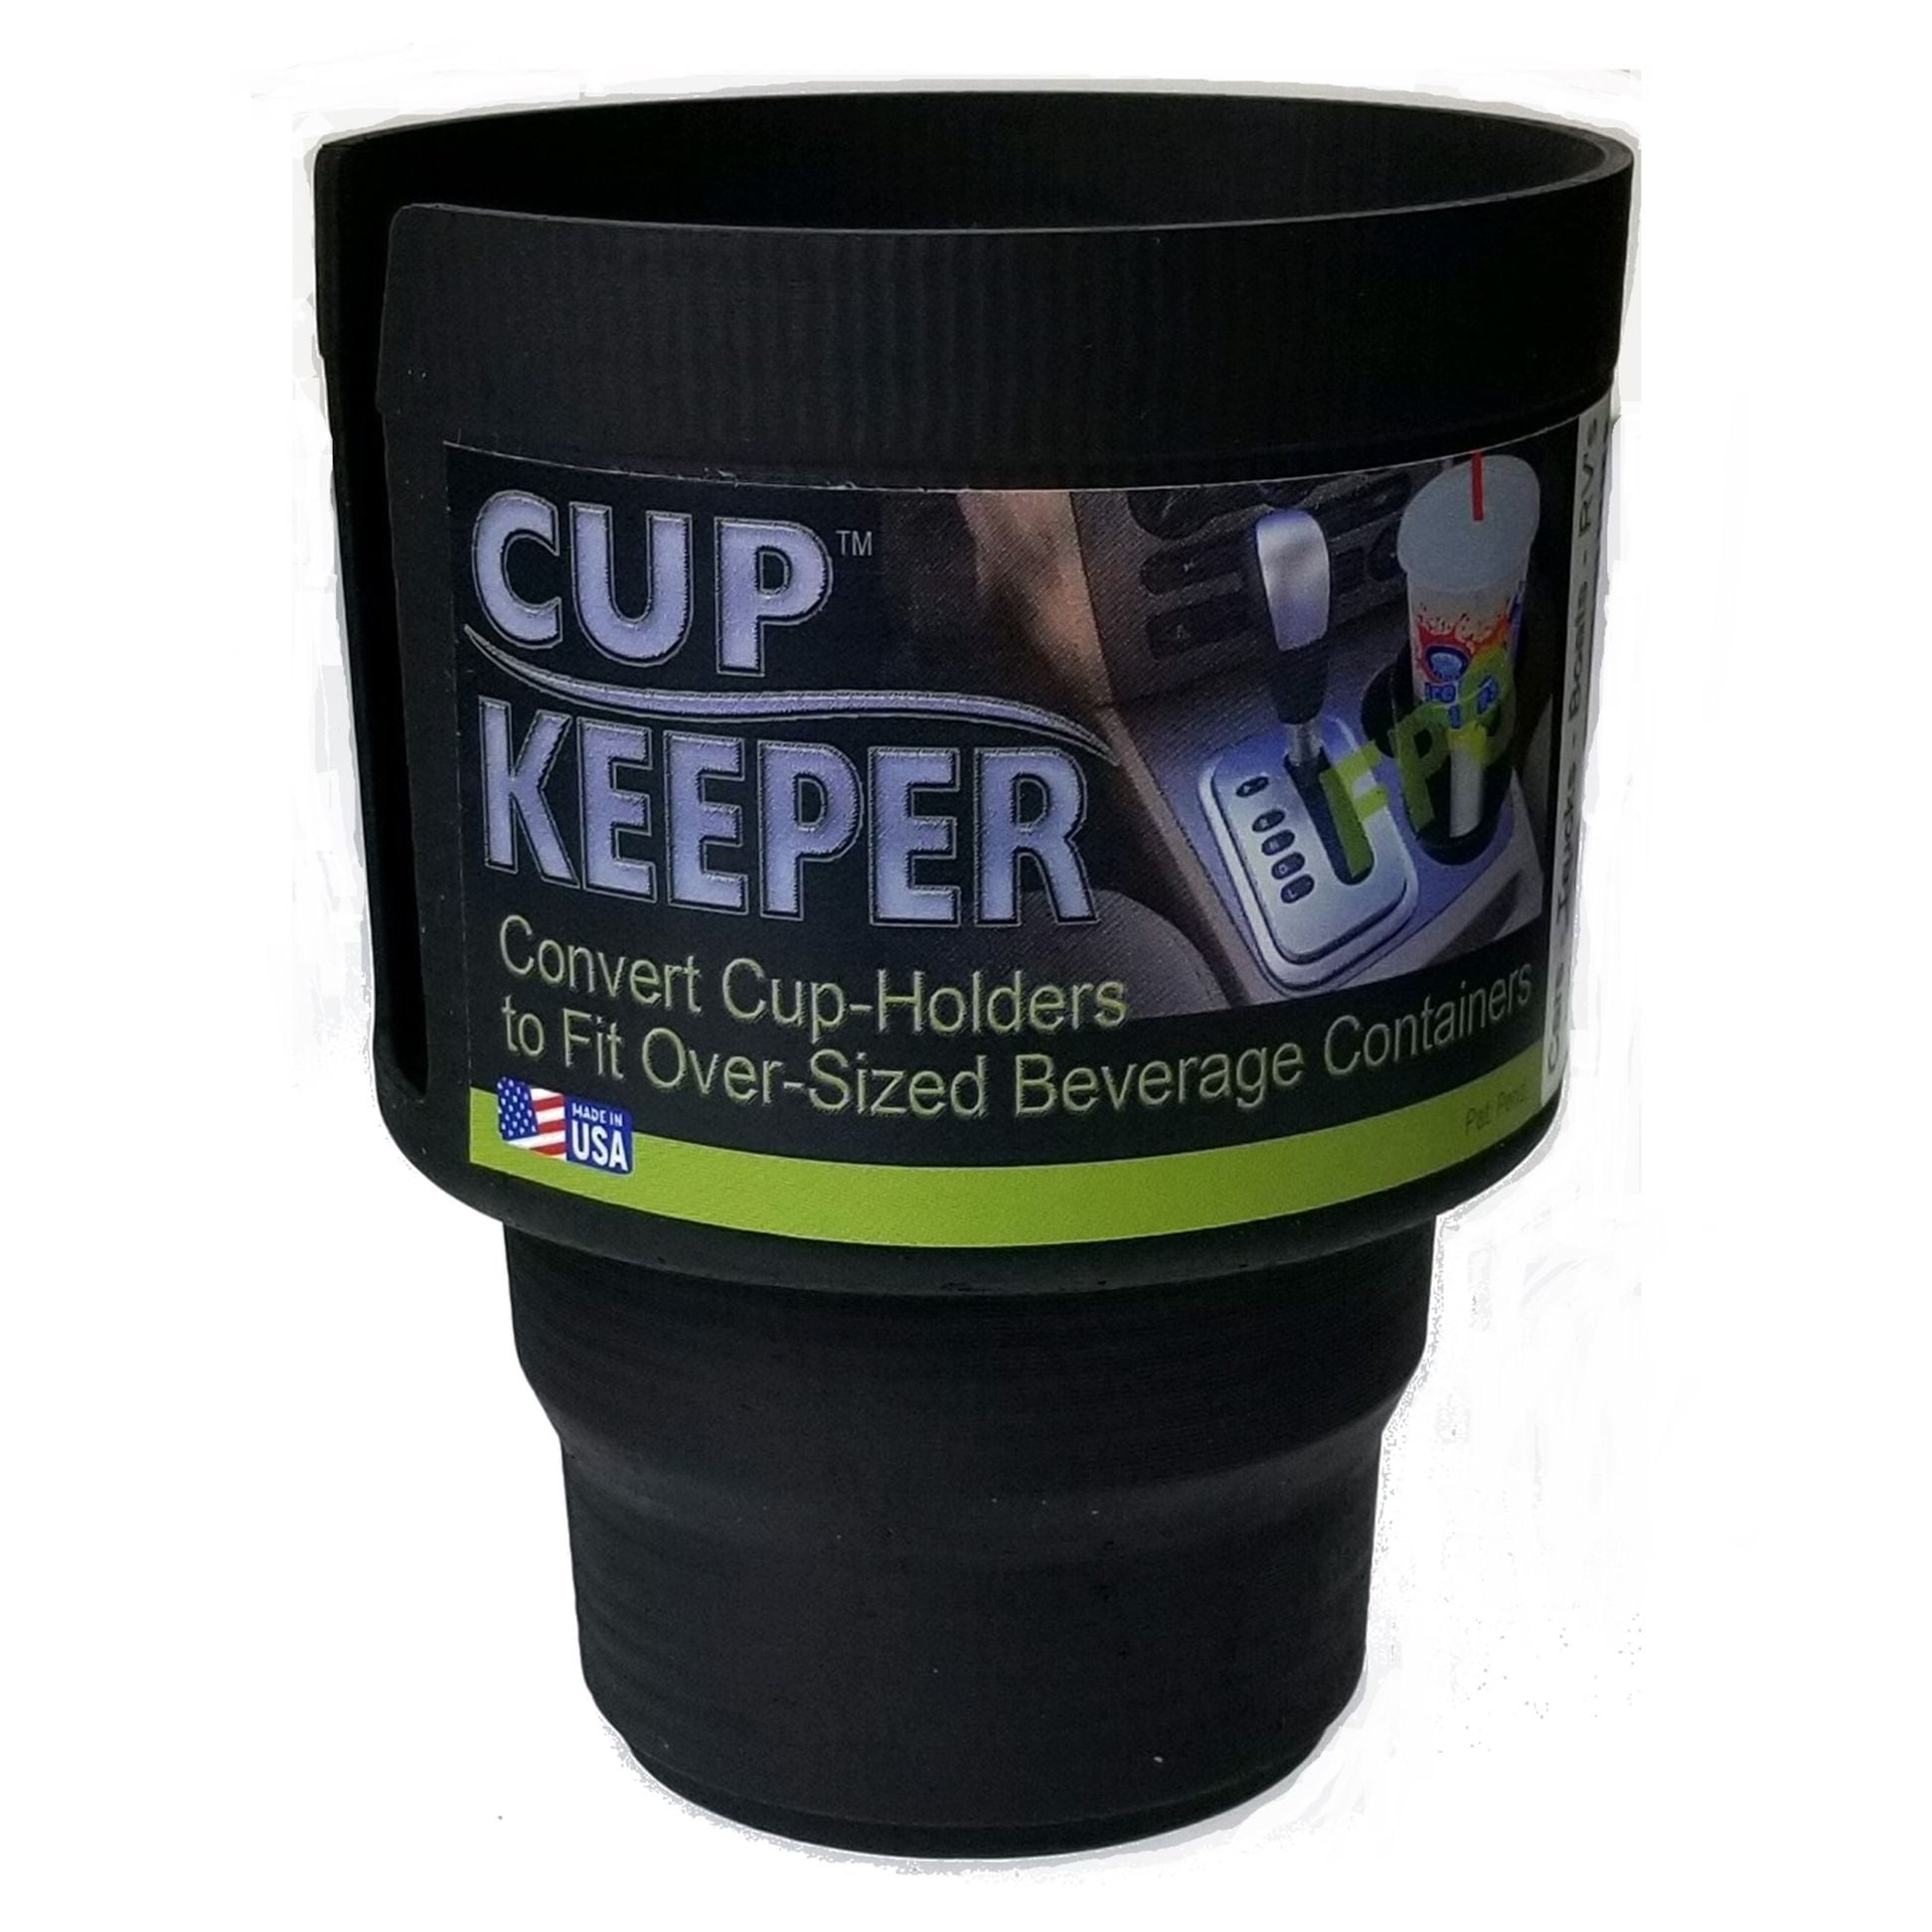 Gadjit Cup Keeper PLUS Car Cup Holder Adapter Expander with Storage, Black